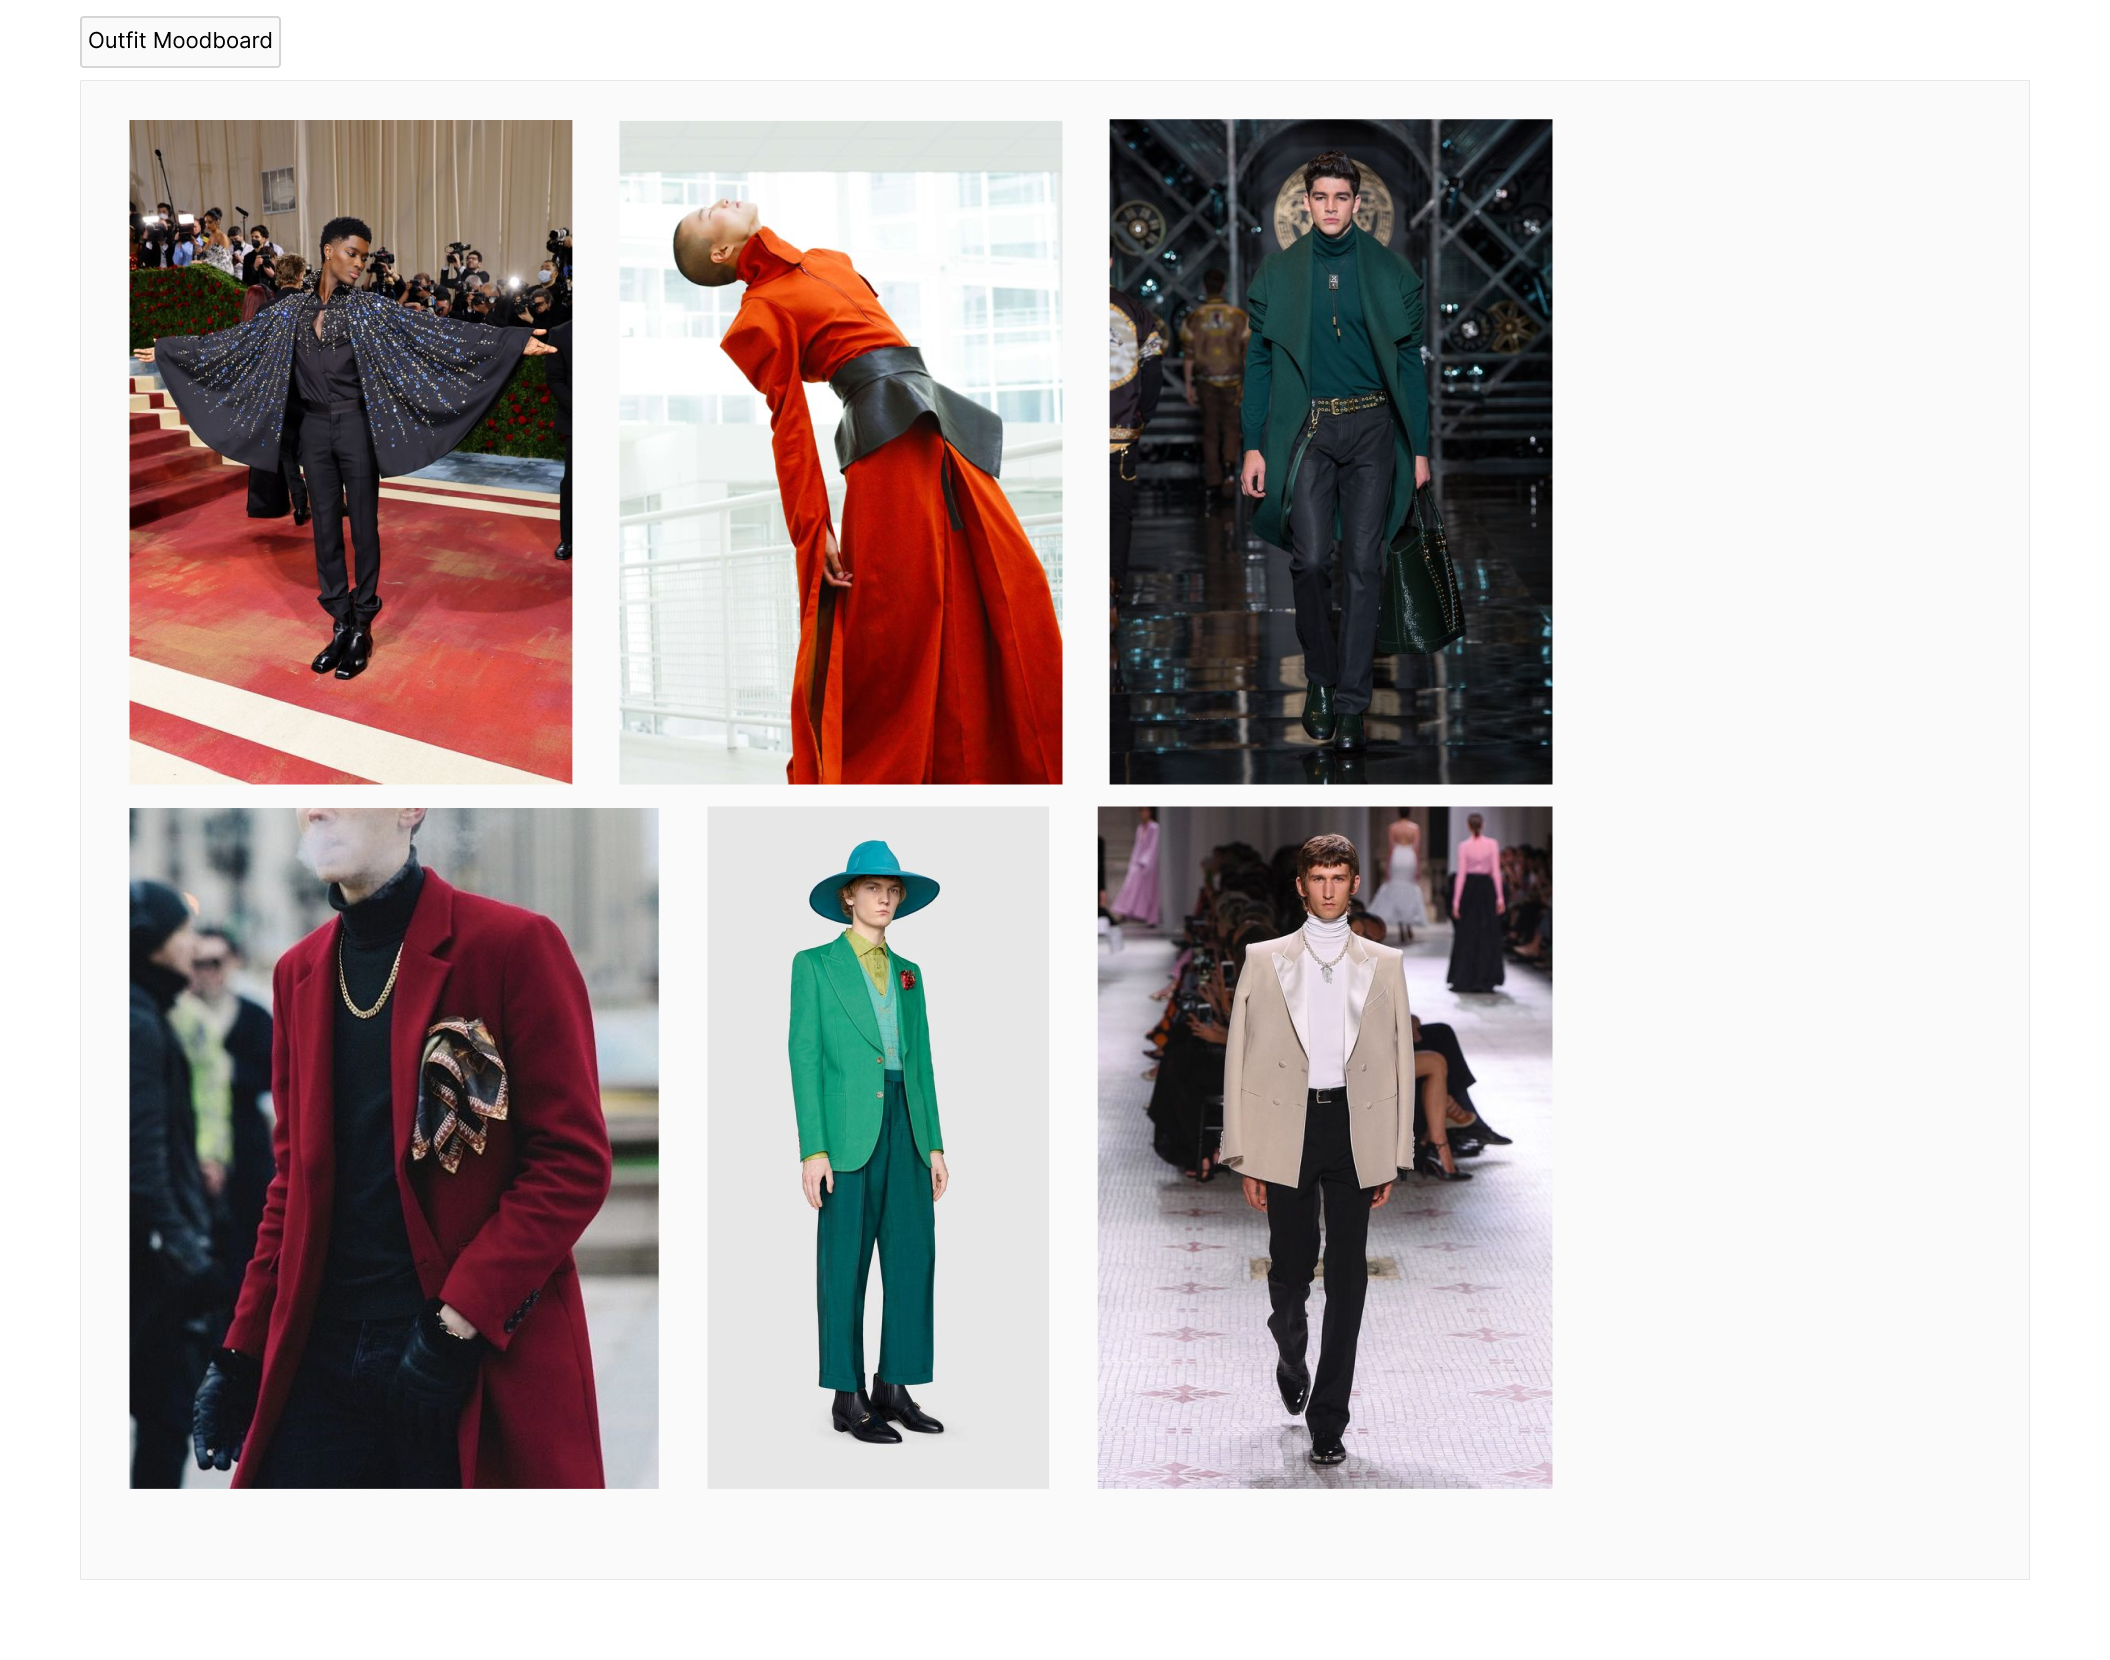 My first moodboard, consisting of different outfits with skirts, hats, oversized coats, scarves, and jackets